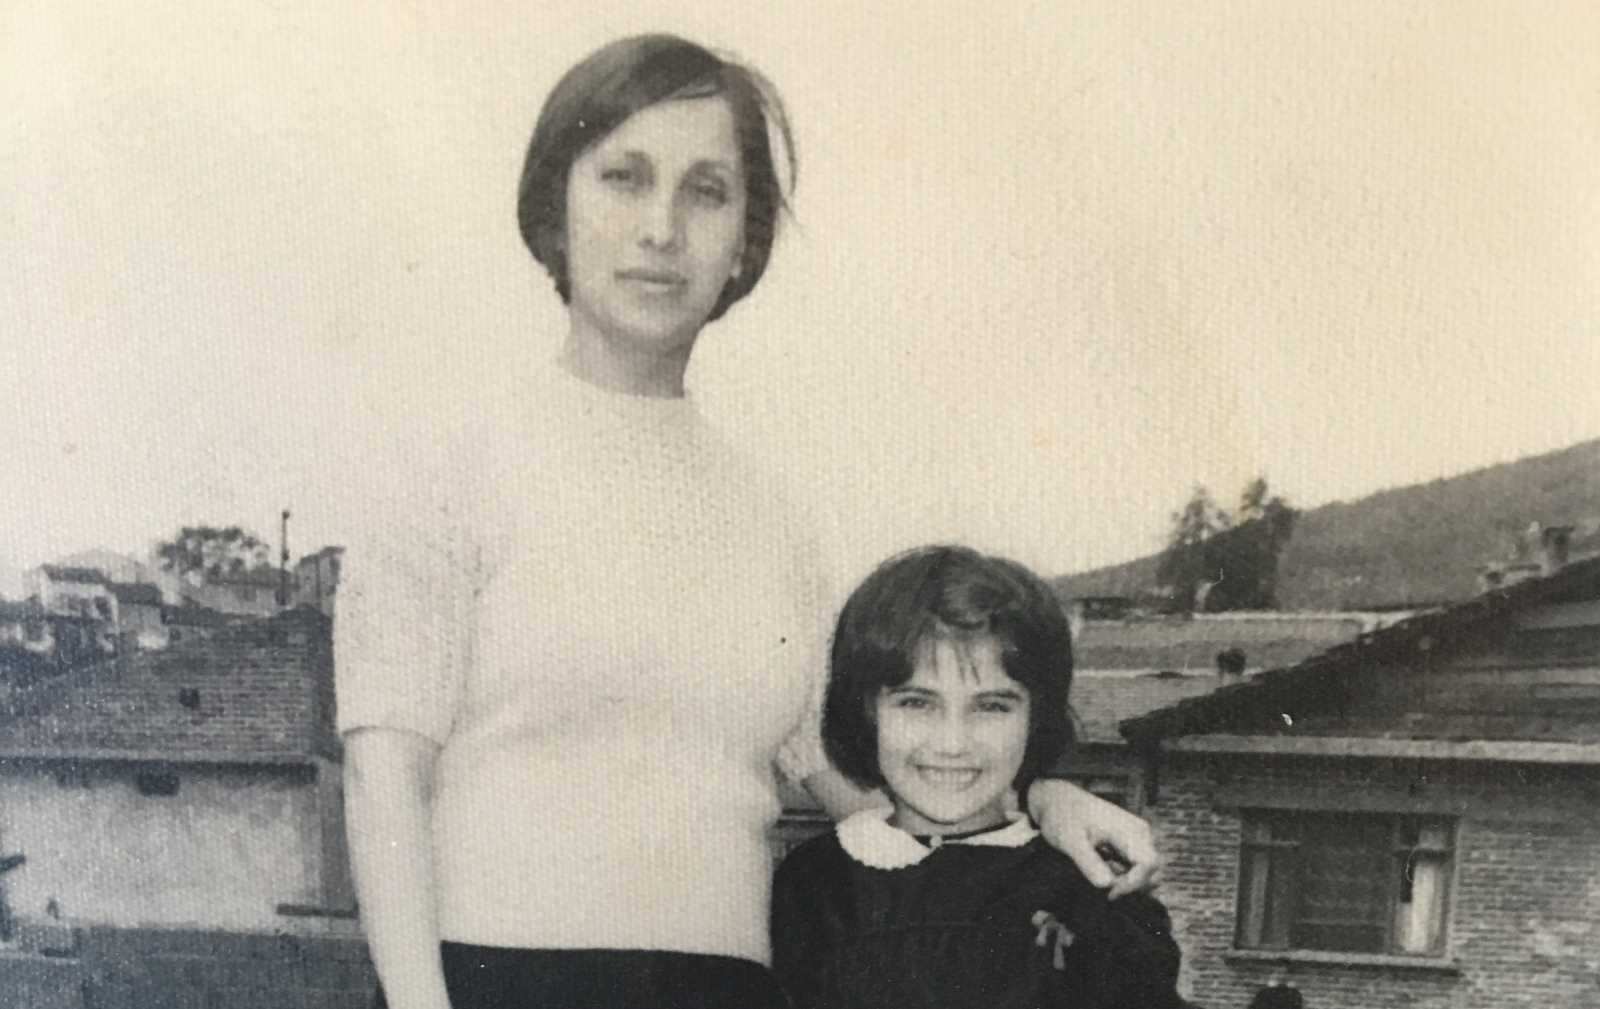 Canan Topçu in 1972 in Turkey, shortly before her migration to Germany. She stands beside her class teacher on the school grounds in Gemlik, south of Istanbul.